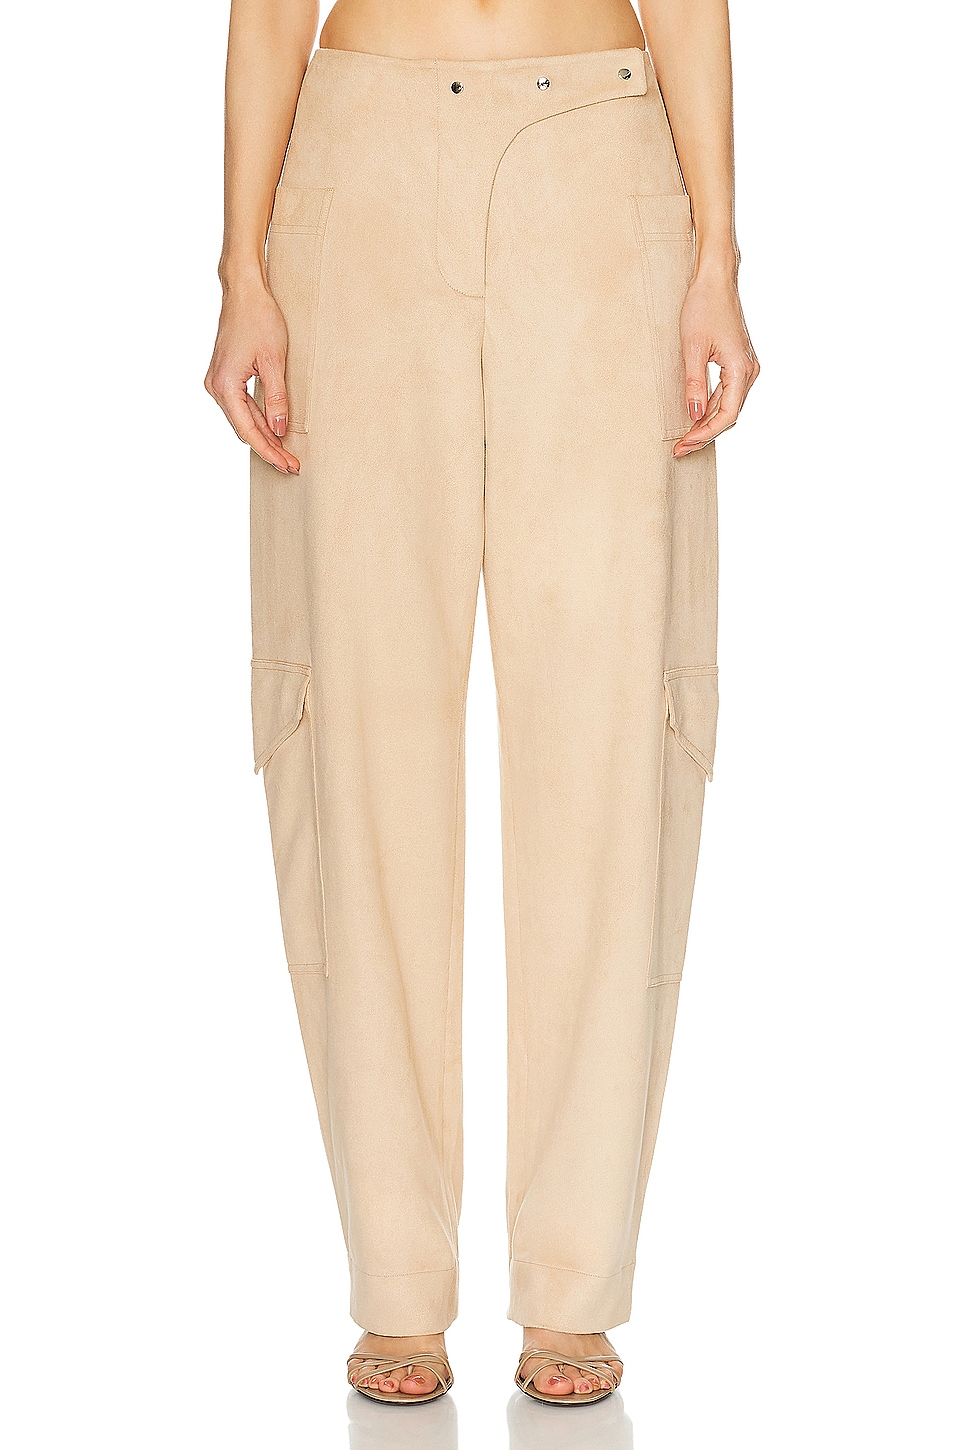 Image 1 of Alexis Emilion Pant in Camel Suede